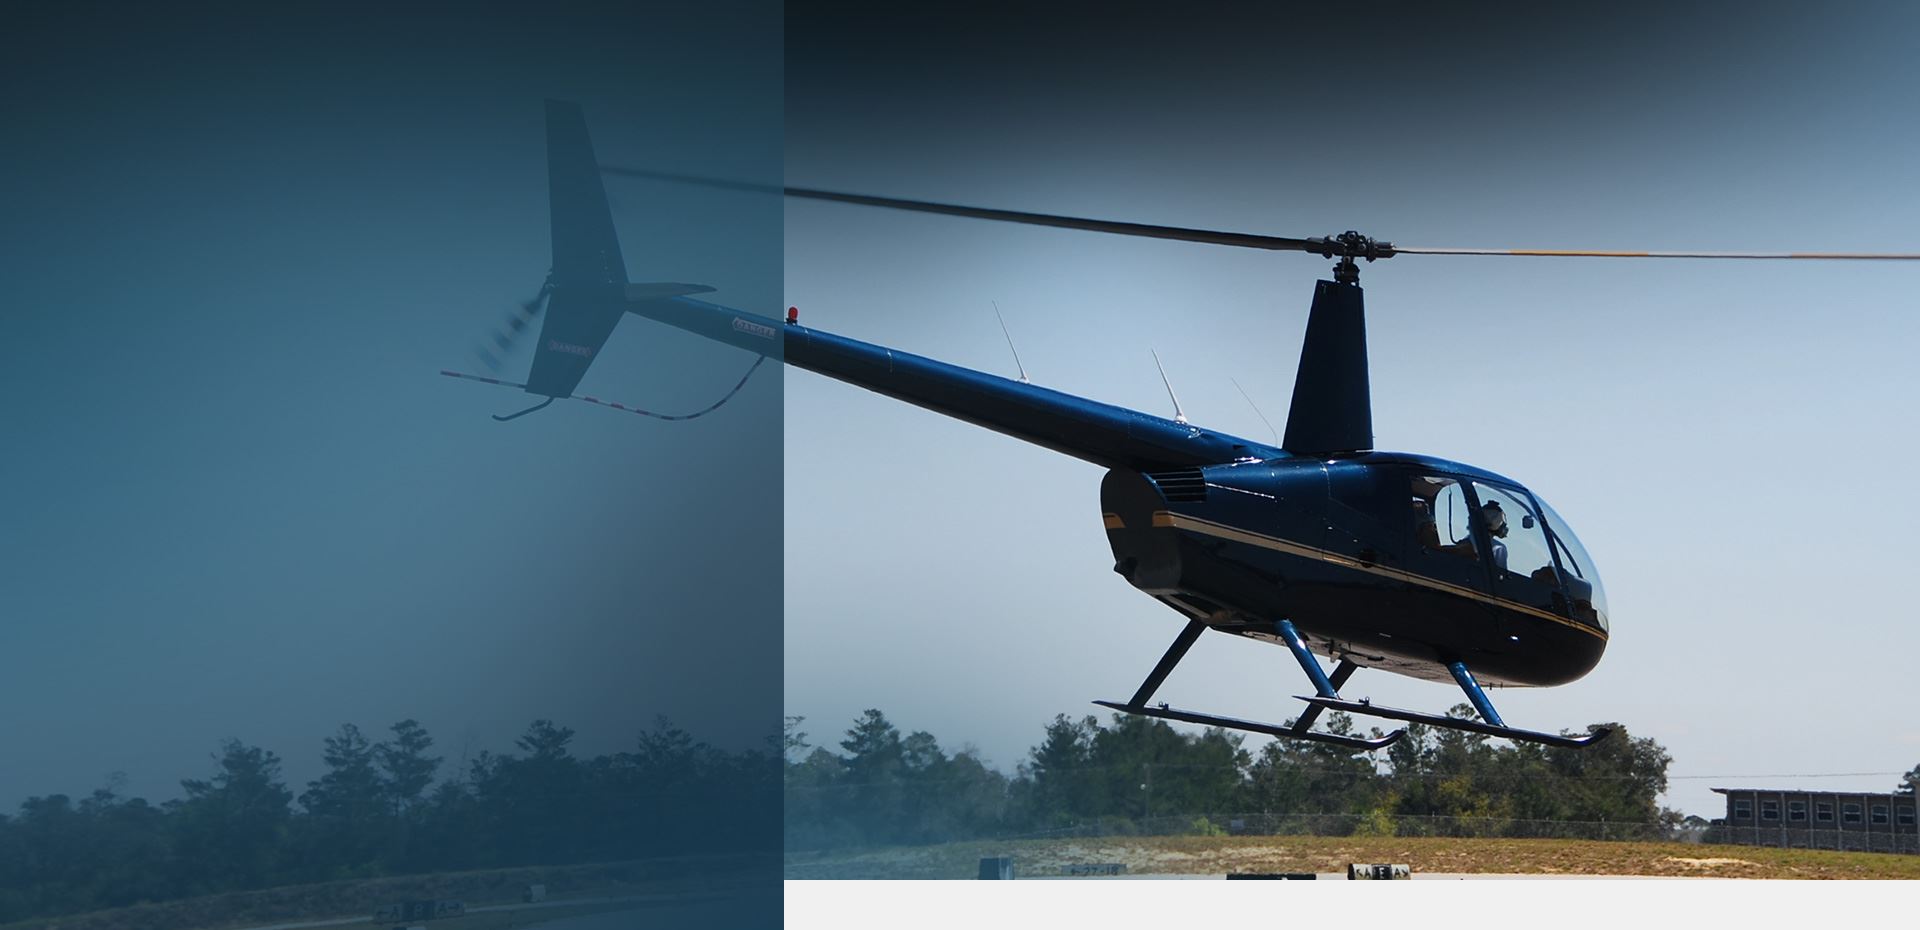 Press Releases - Robinson Helicopter Company